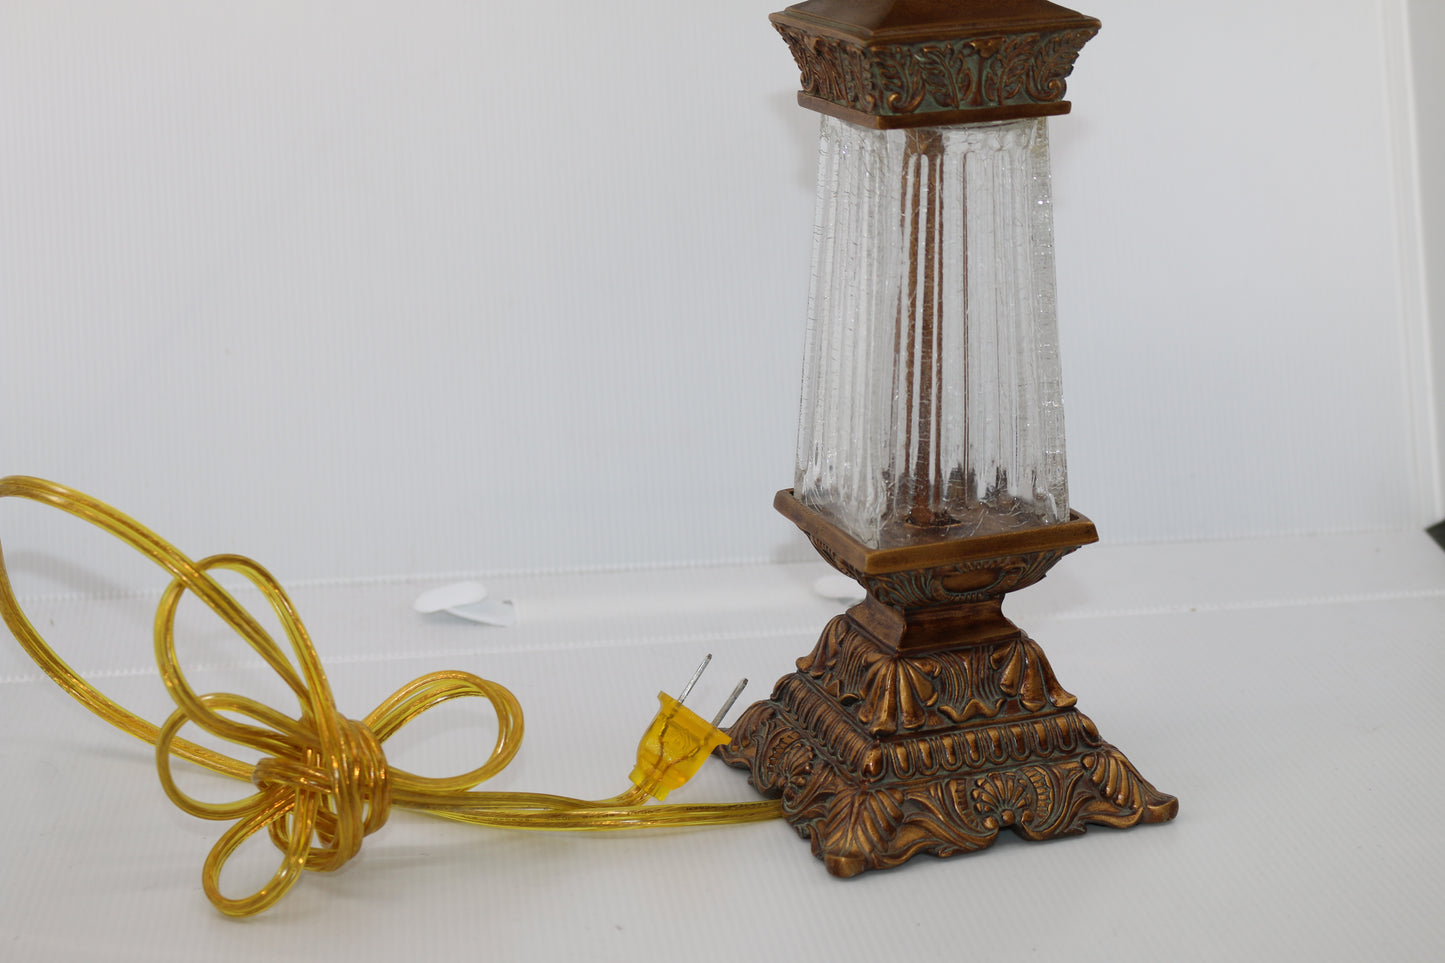 Vintage glass Electric Table Lamp nightstand with yellow cable